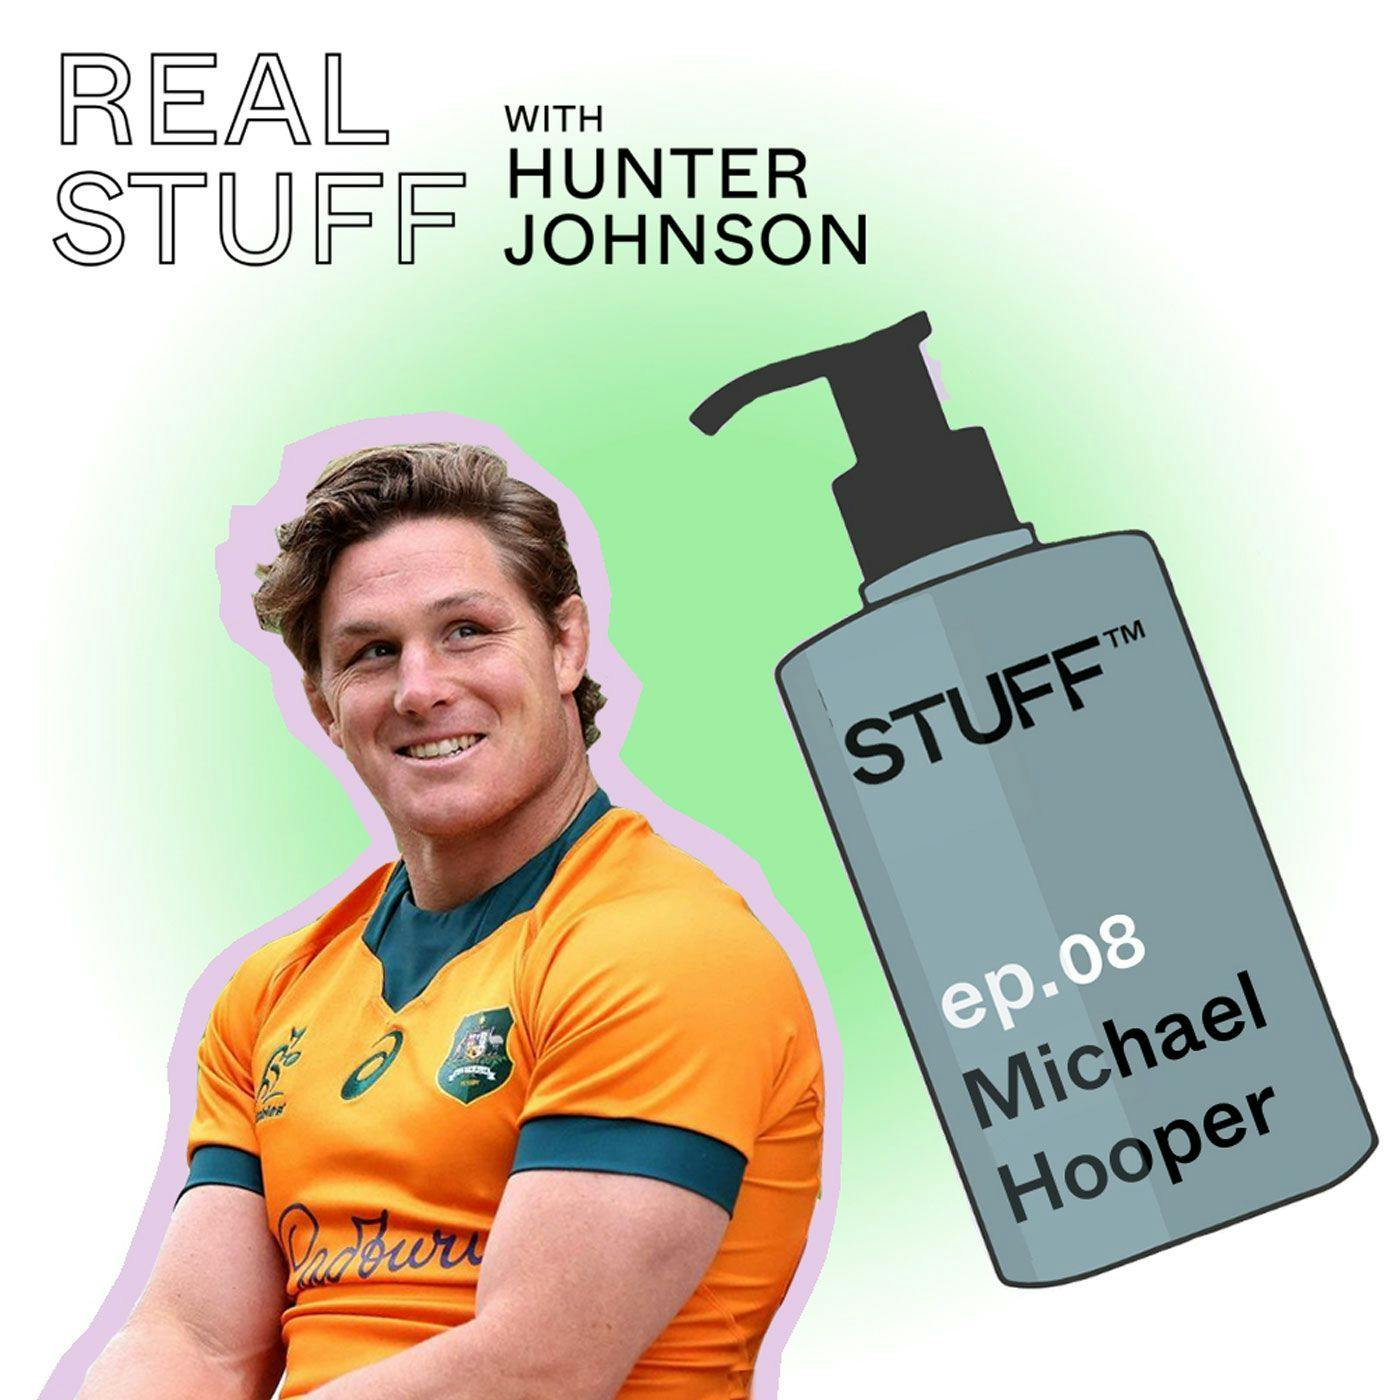 Wallabies Captain | Michael Hooper | The Power of Asking for Help #8